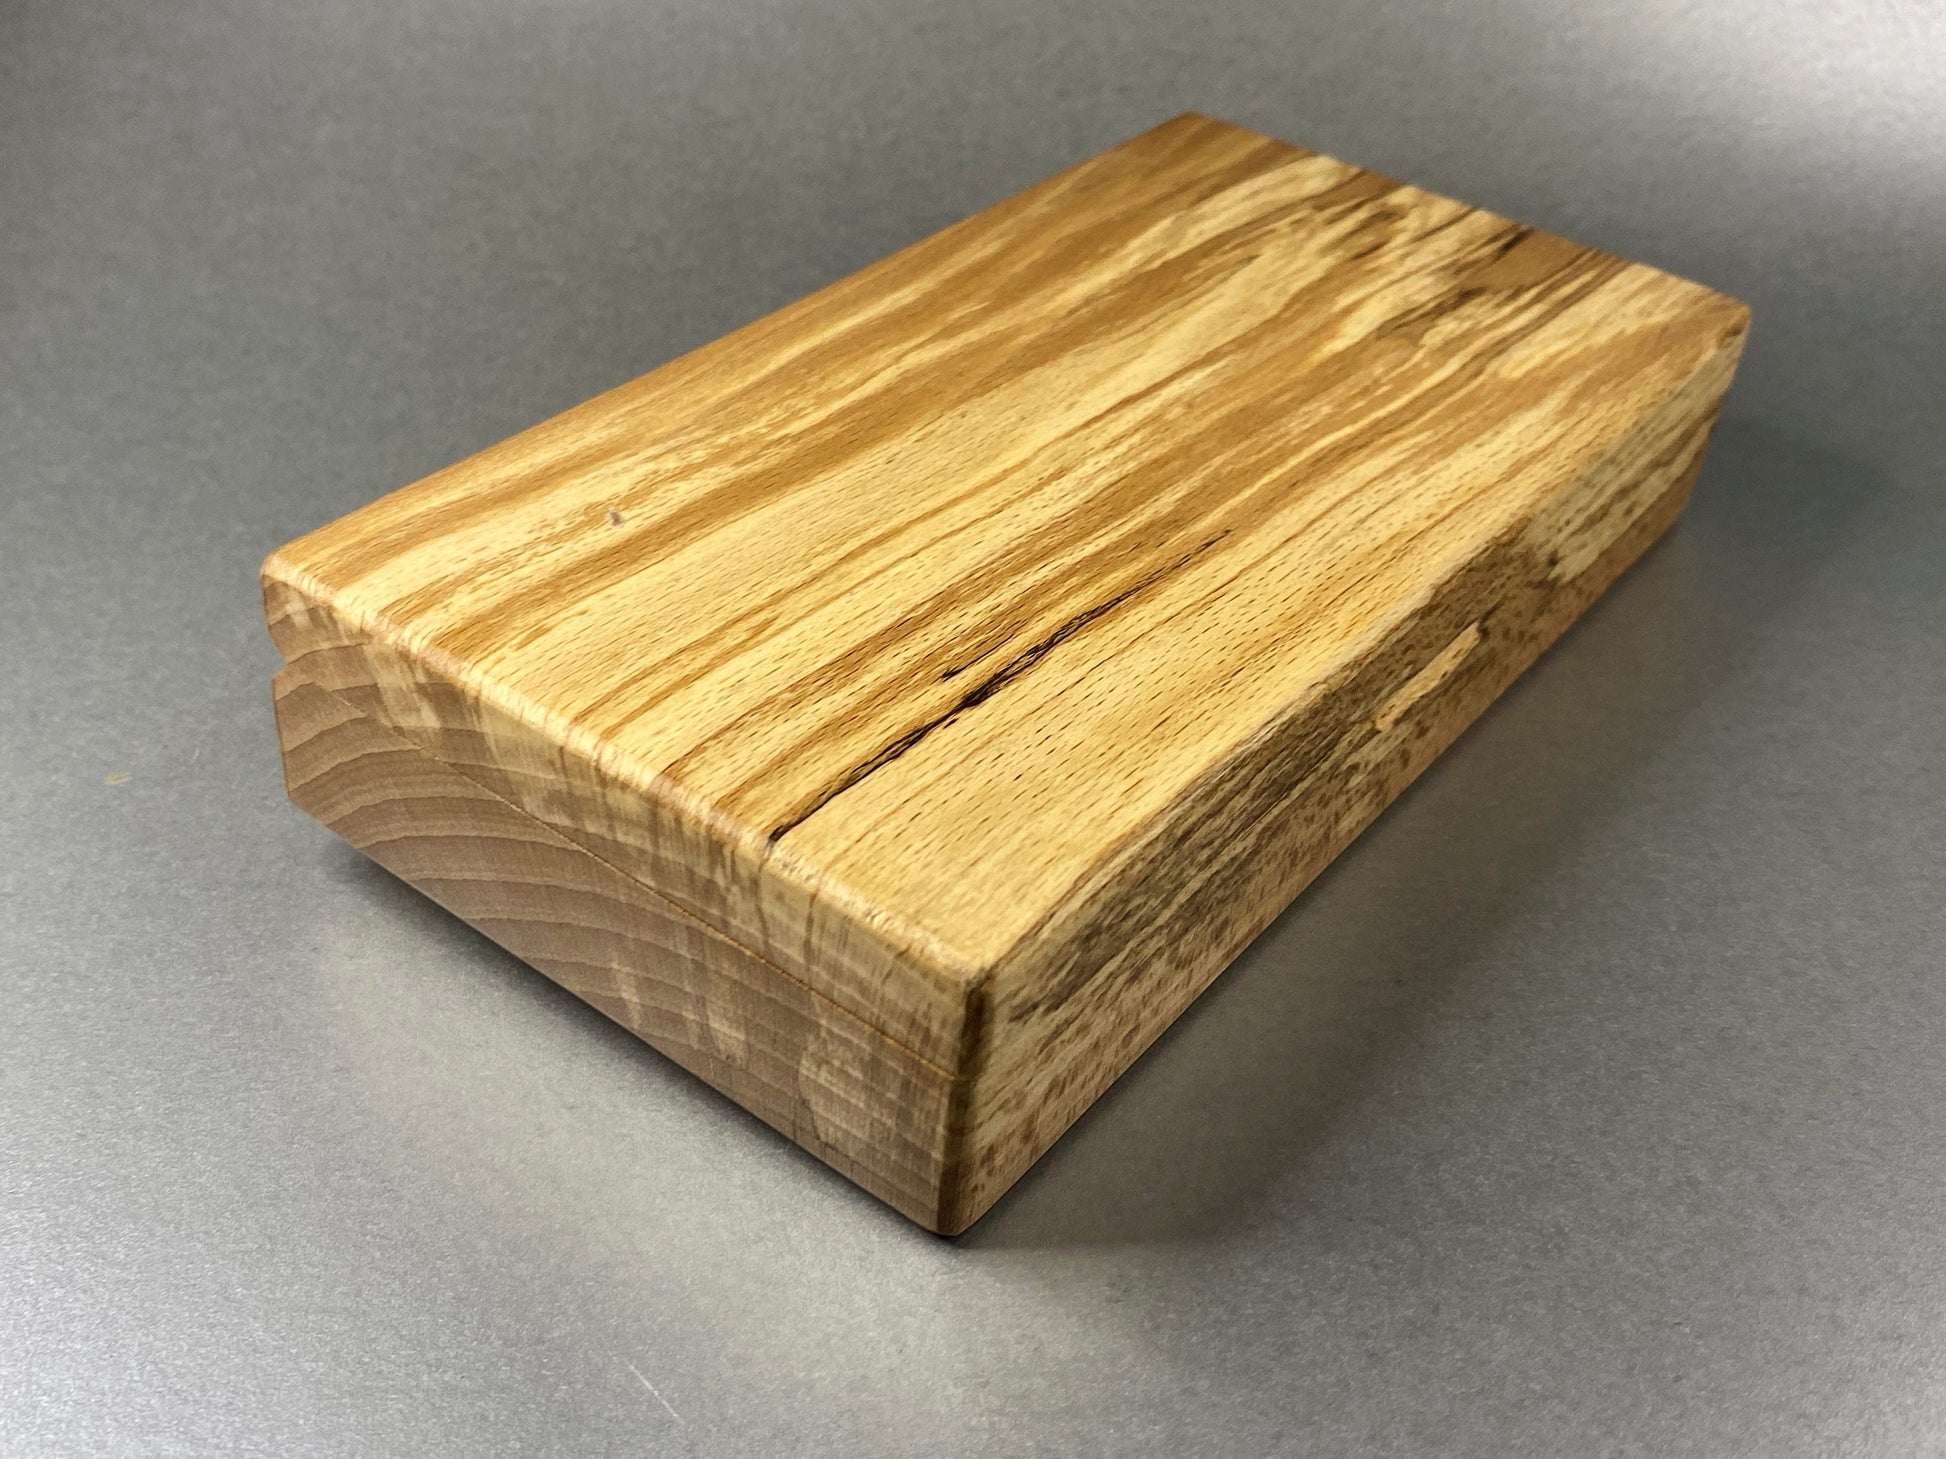 Open lidded Spalted Beech wood box showing all its fine looking grain effects in the end grain and the lid